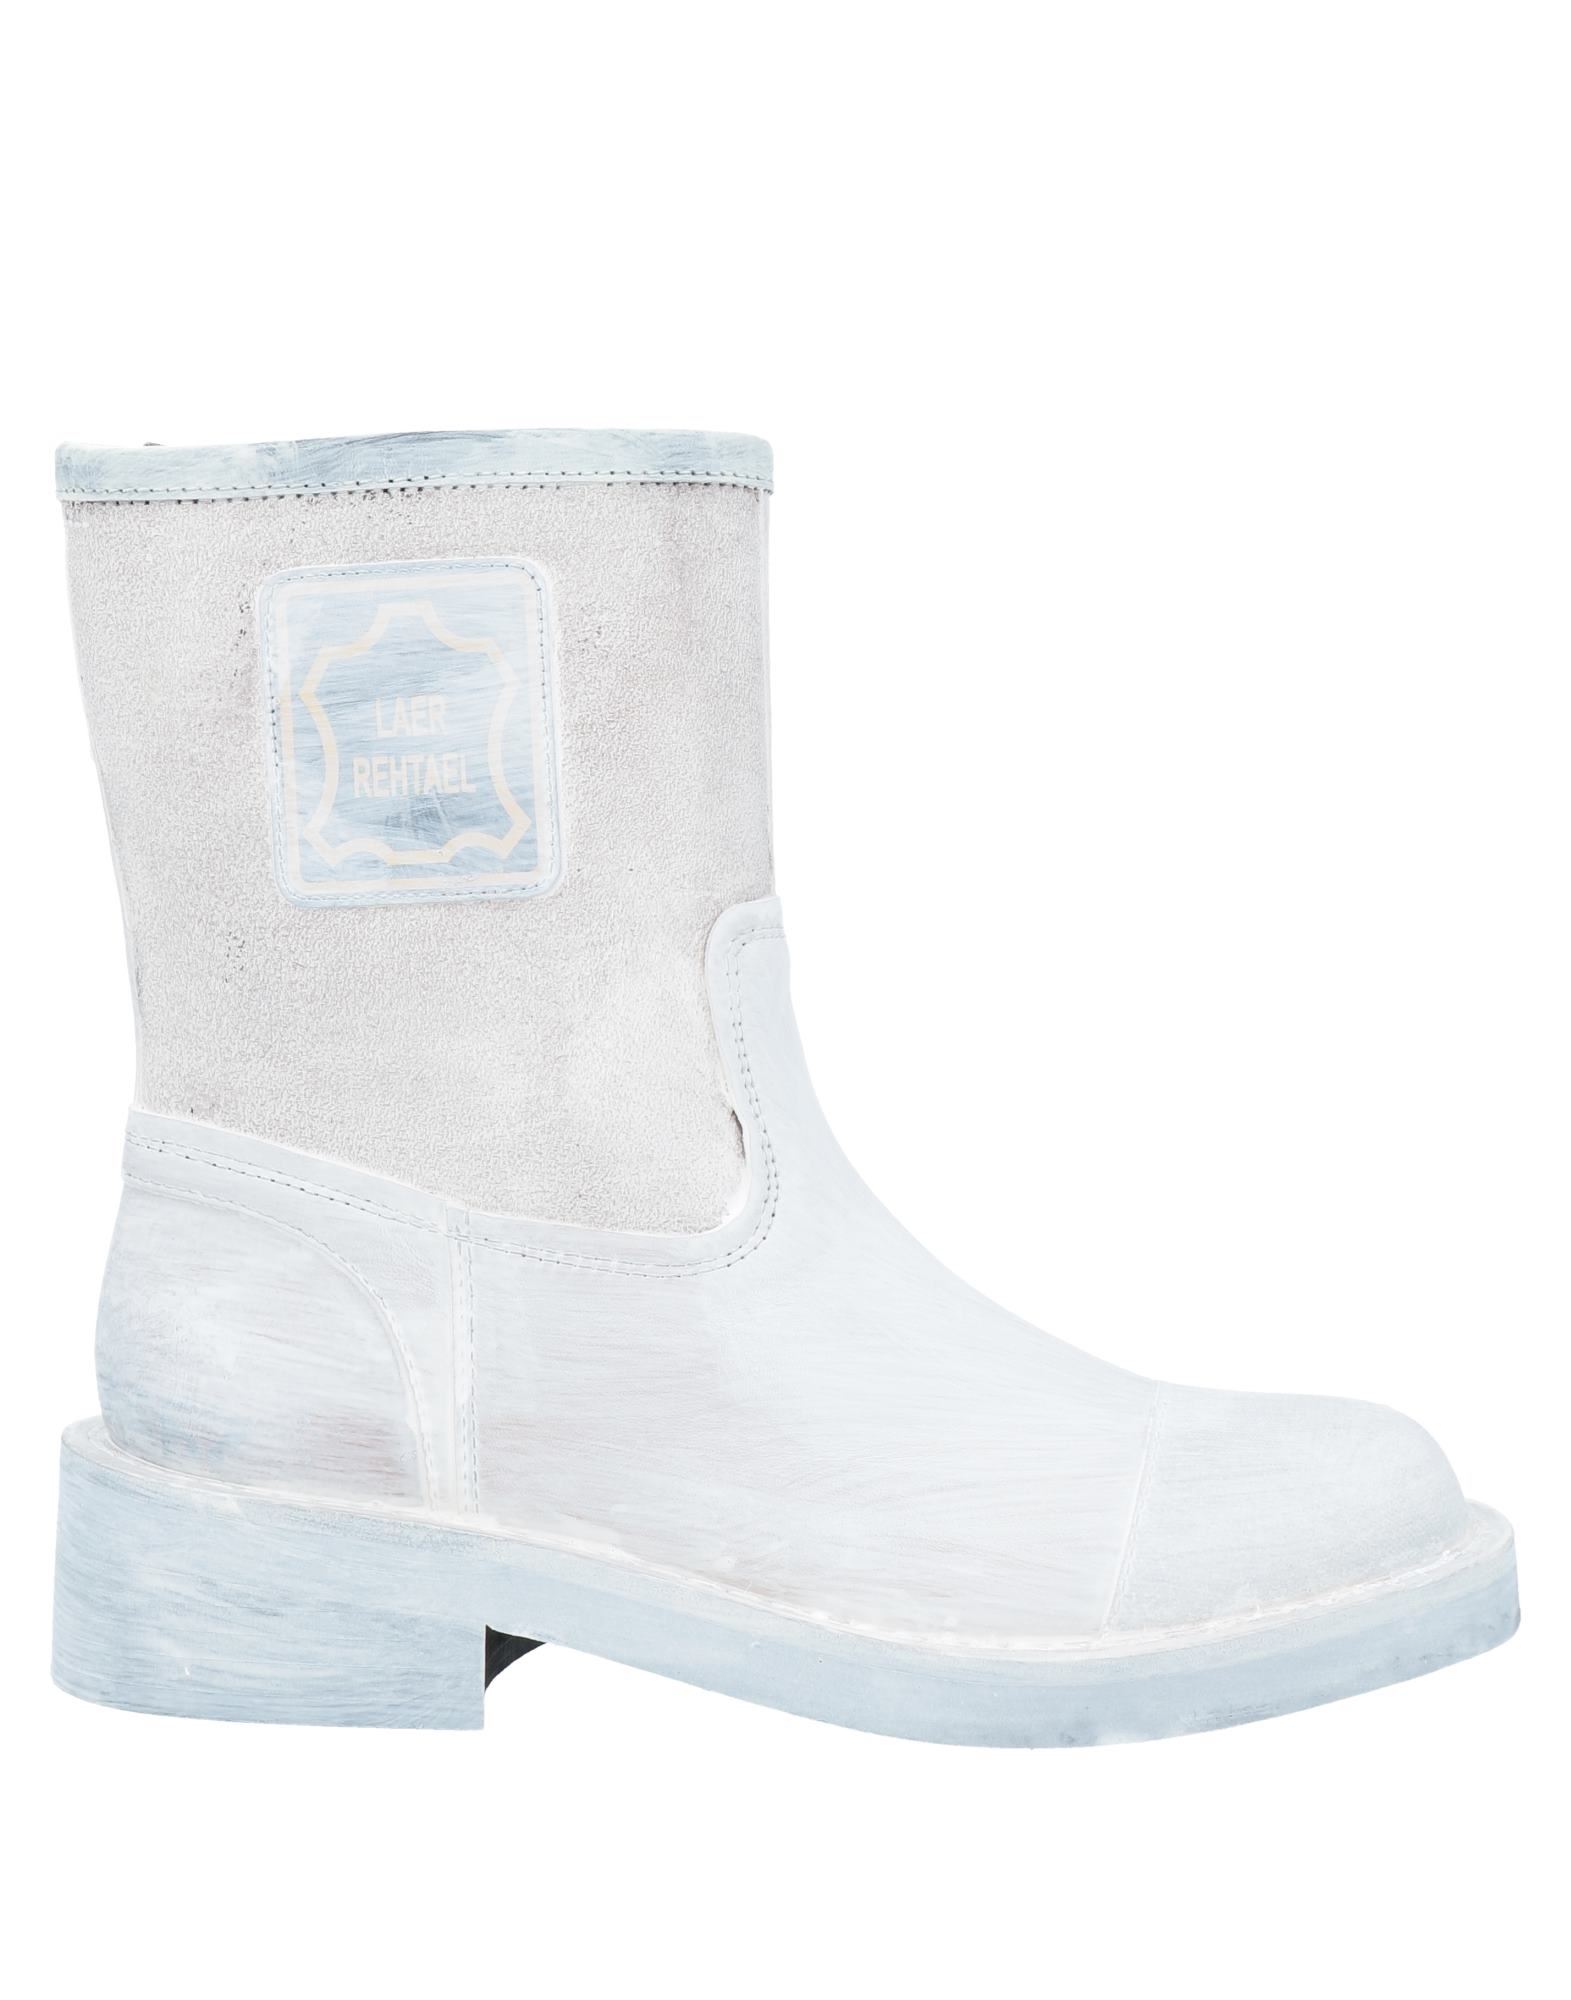 Mm6 Maison Margiela Ankle Boots In White